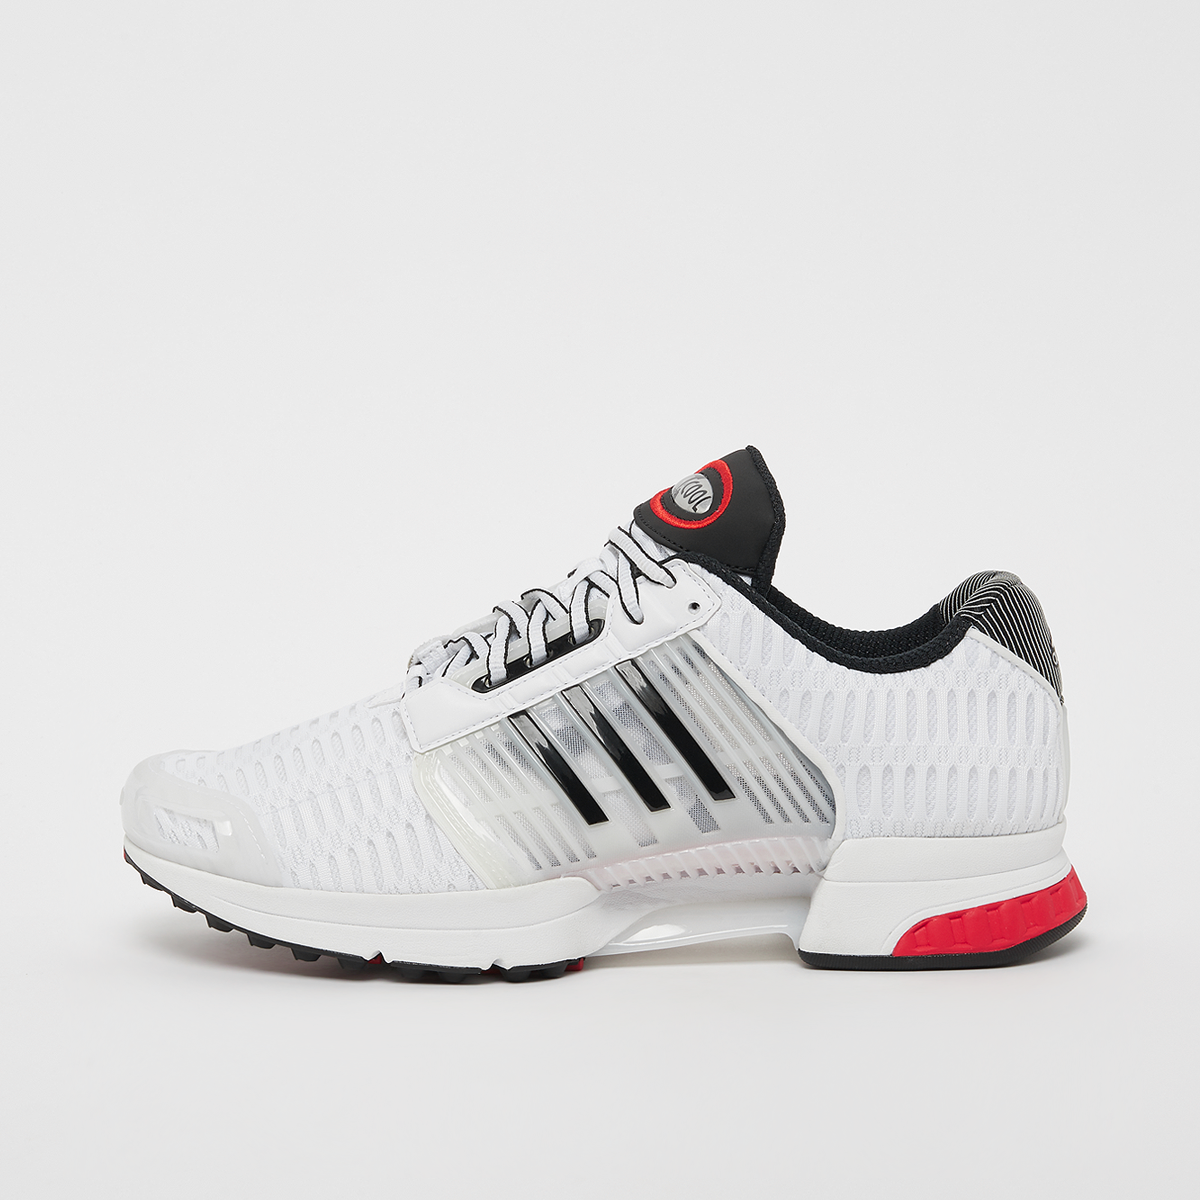 Sneaker Climacool 1, adidas Originals, Footwear, core black/red/ftwr white, taille: 36 2/3